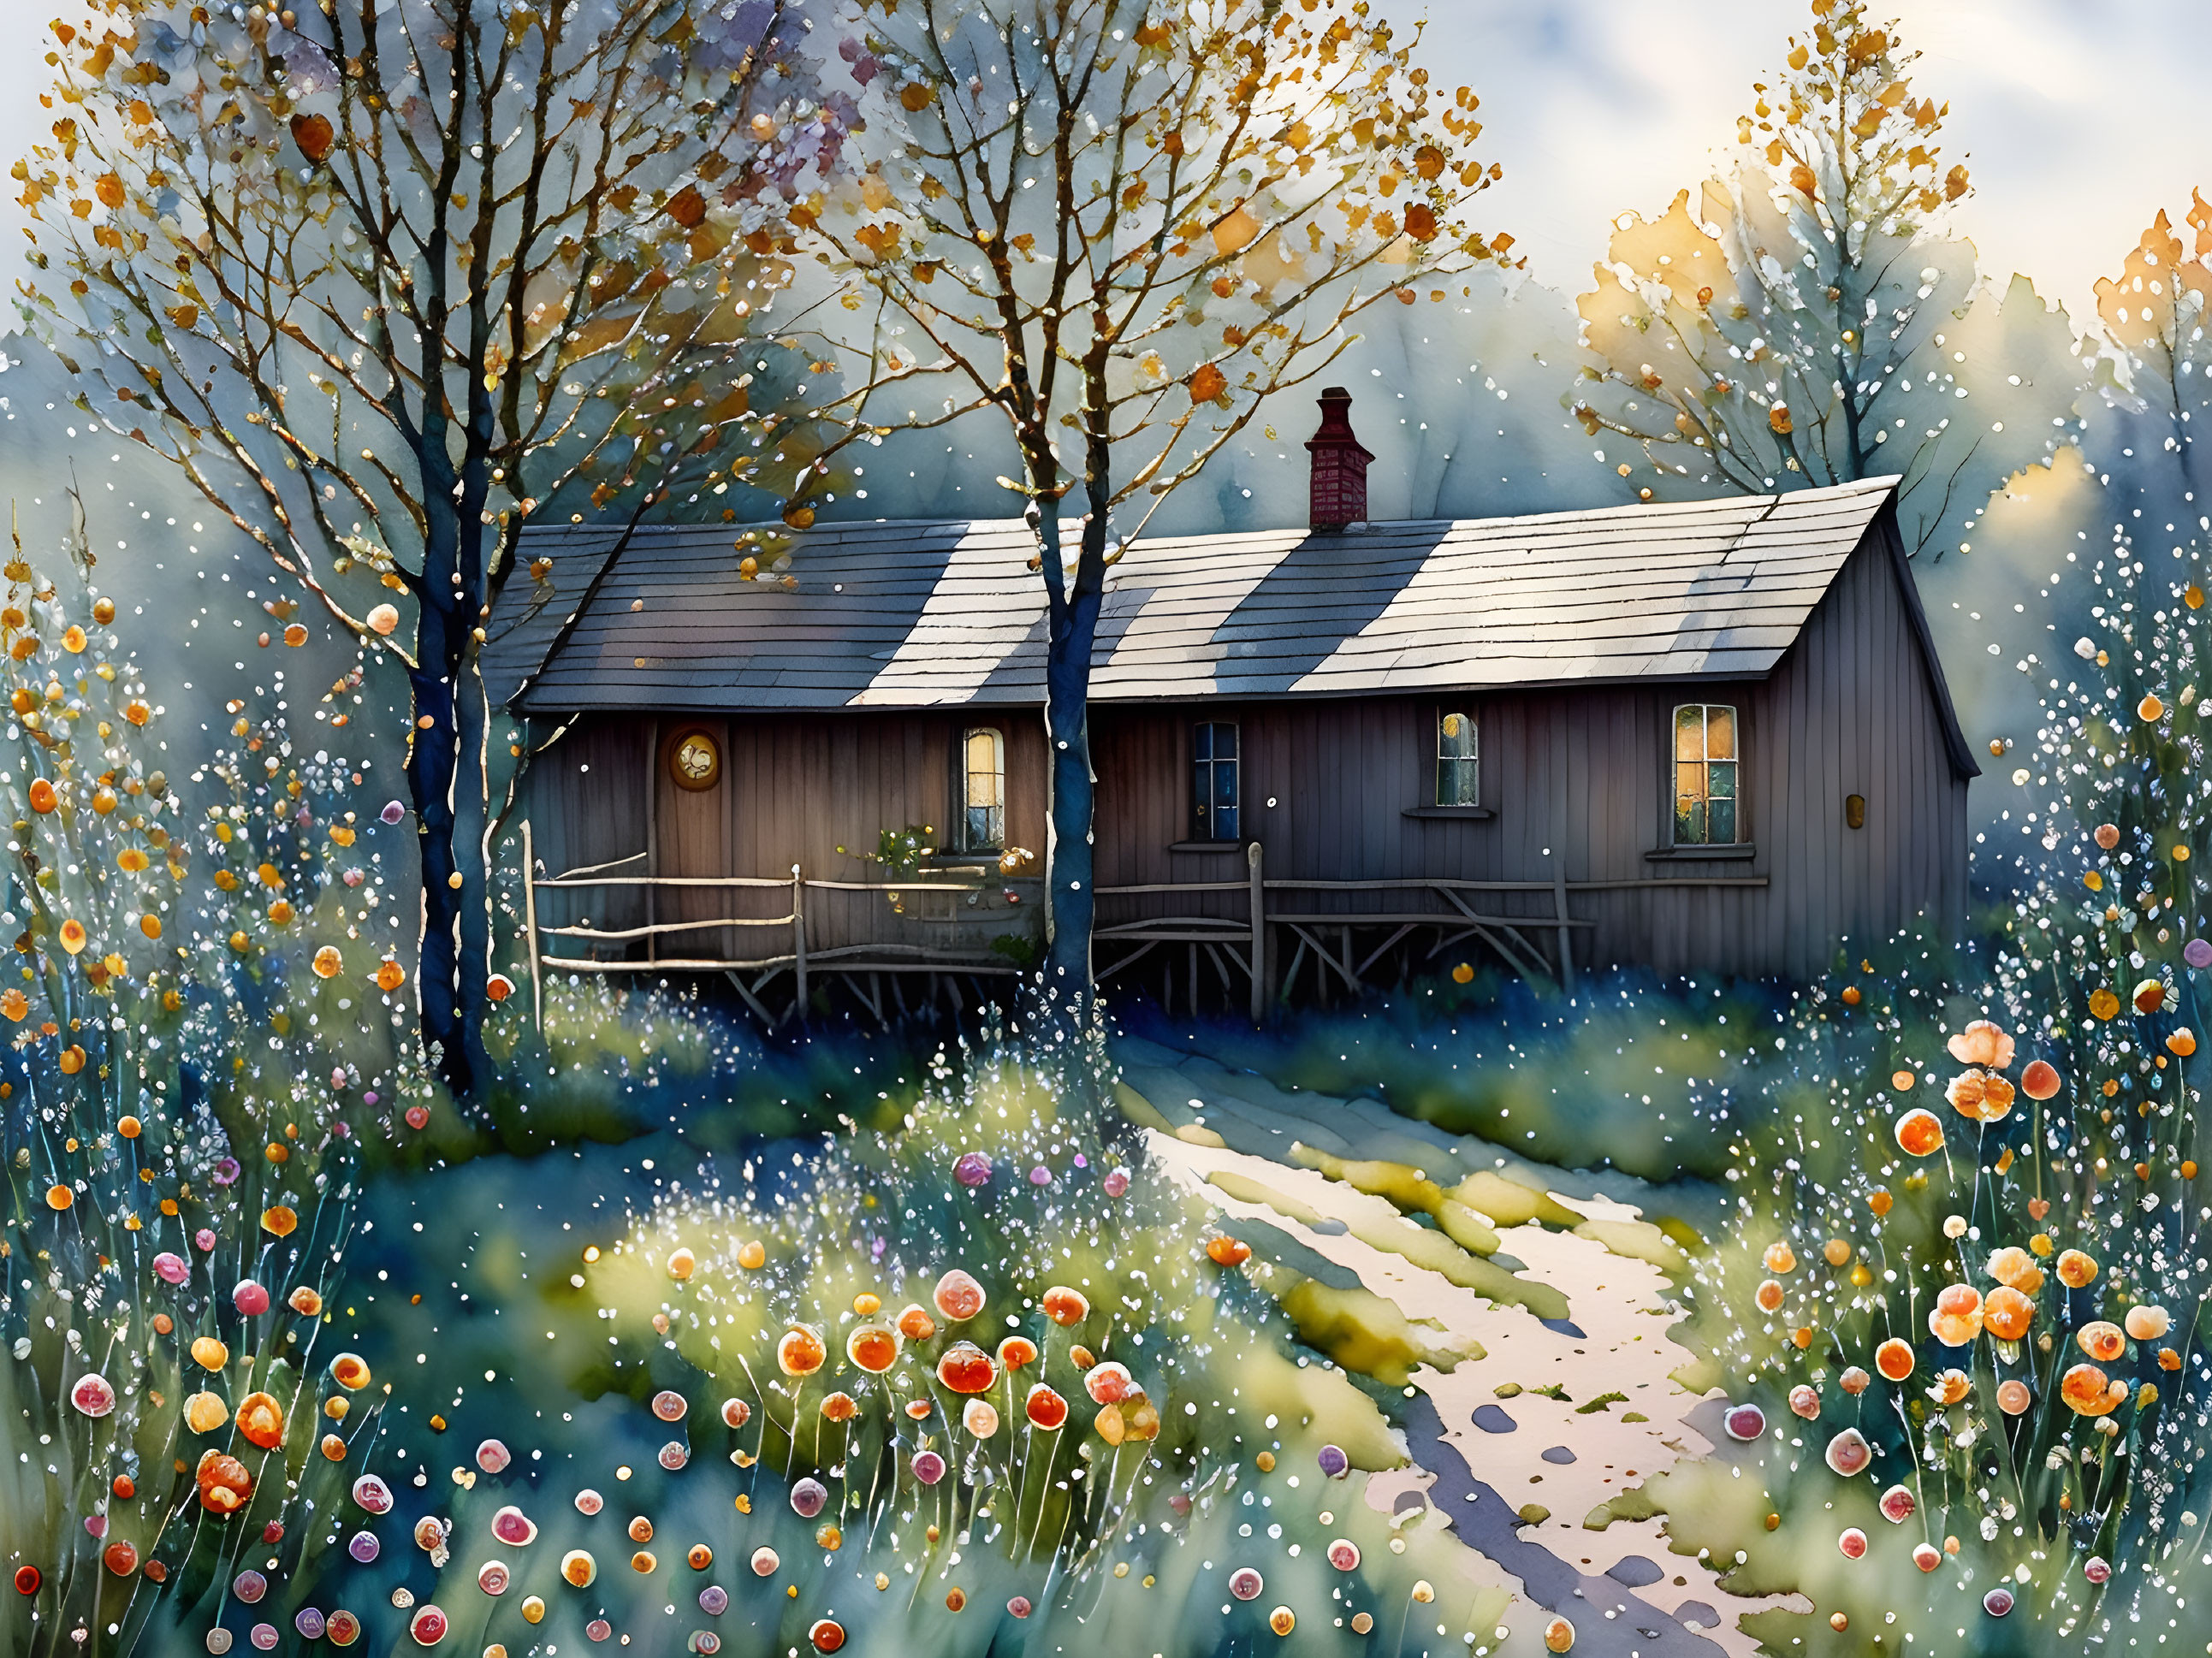 Autumnal wooden cottage surrounded by blooming flowers and snowflakes